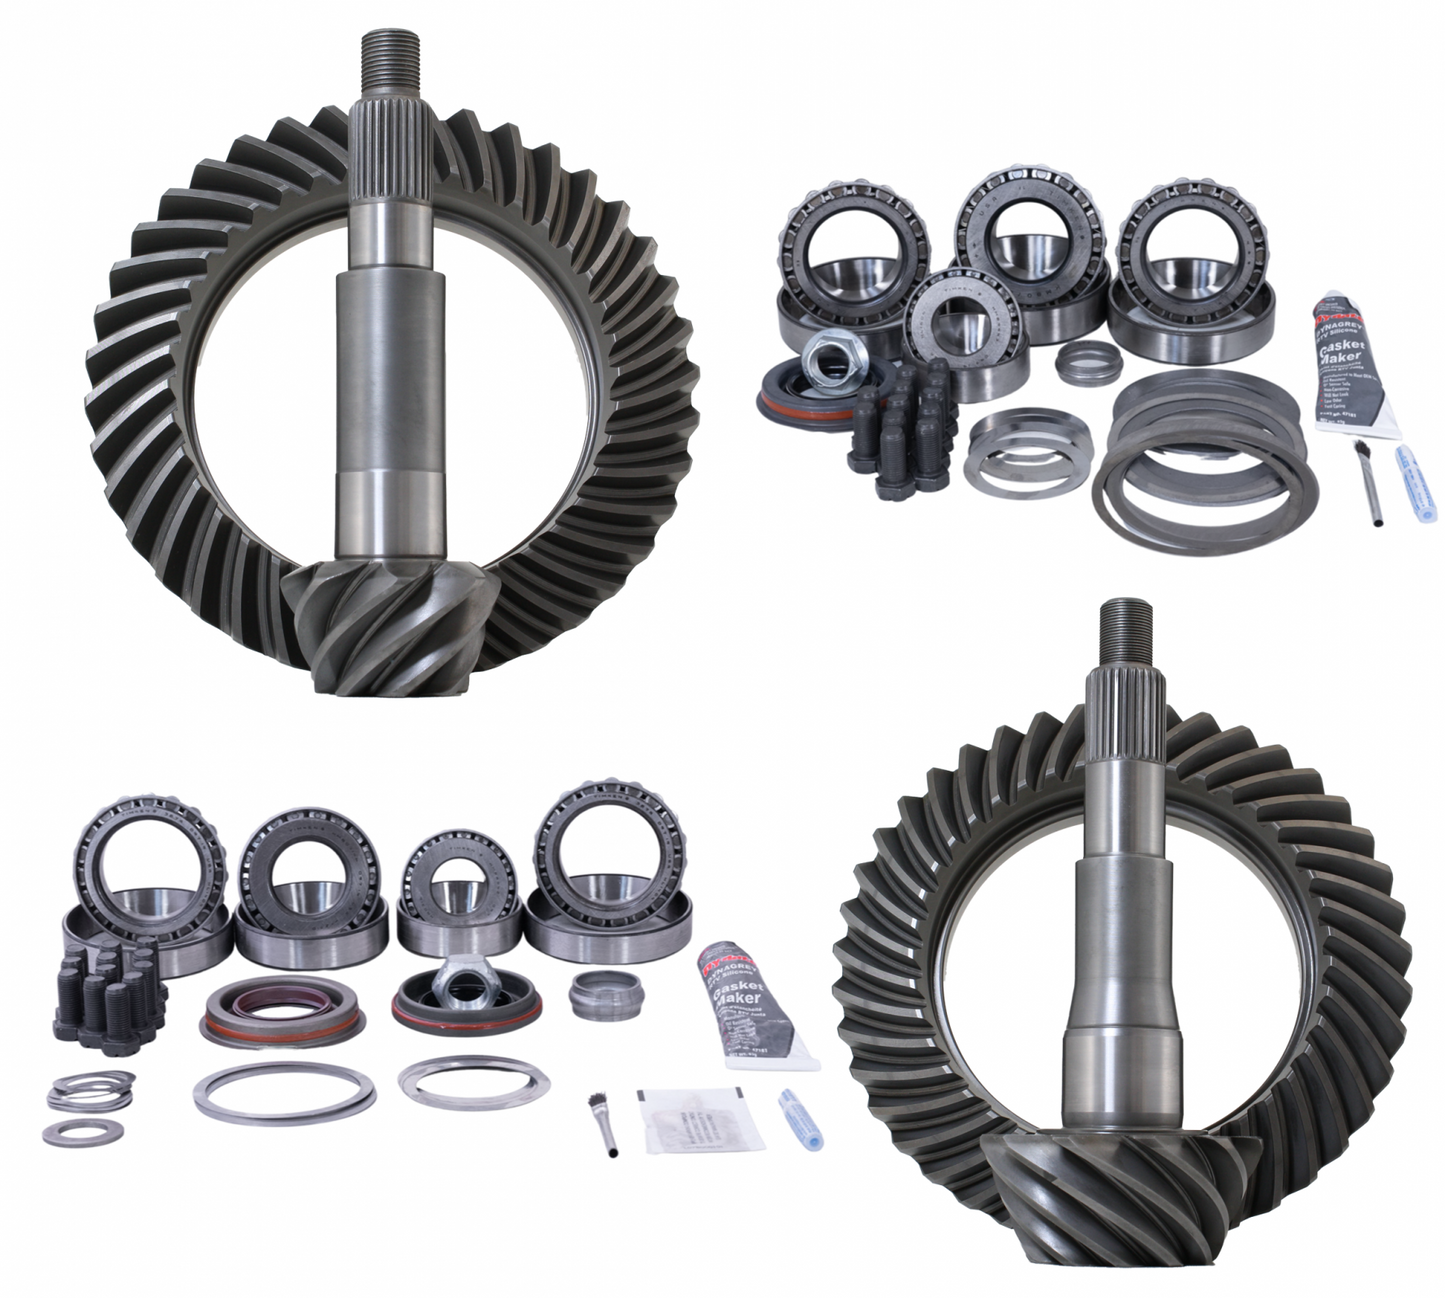 Ford F-150 97-08 Gear Package (F8.8-F8.8 Reverse) 4.56 Ratio Gear Sets Revolution Gear and Axle